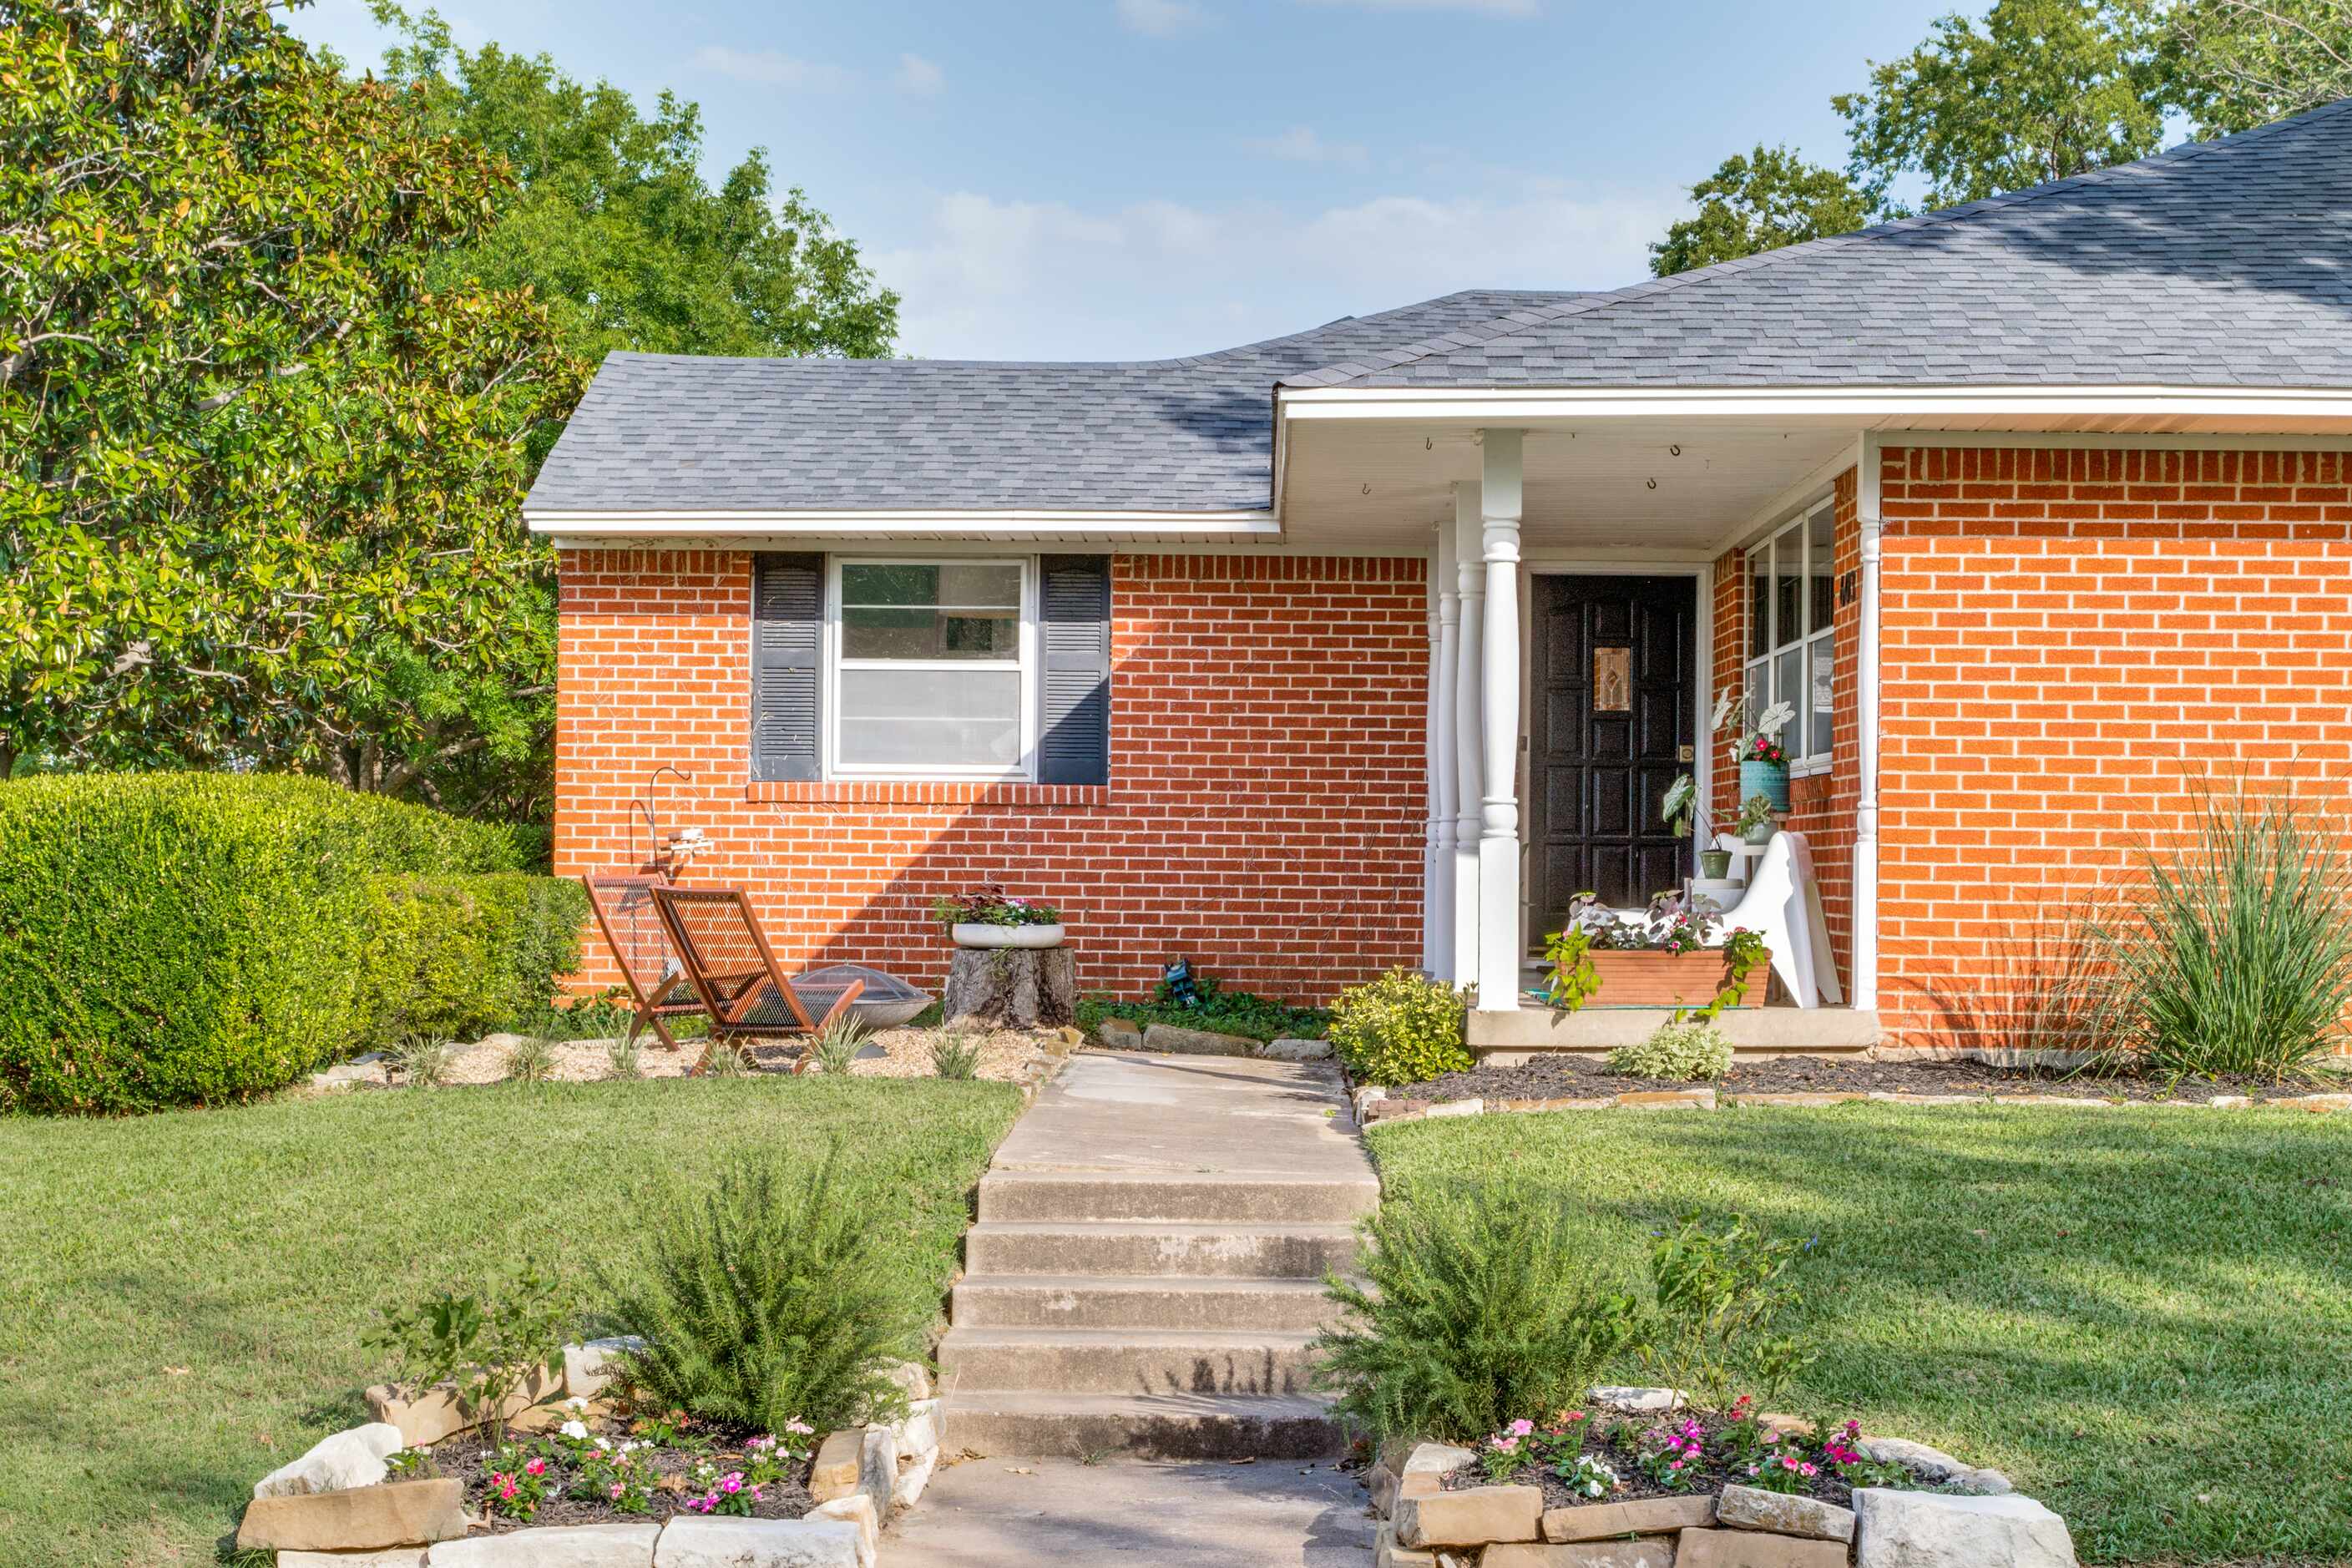 A renovated 1950s home in Old Lake Highlands at 603 Classen Drive has an accessory dwelling...